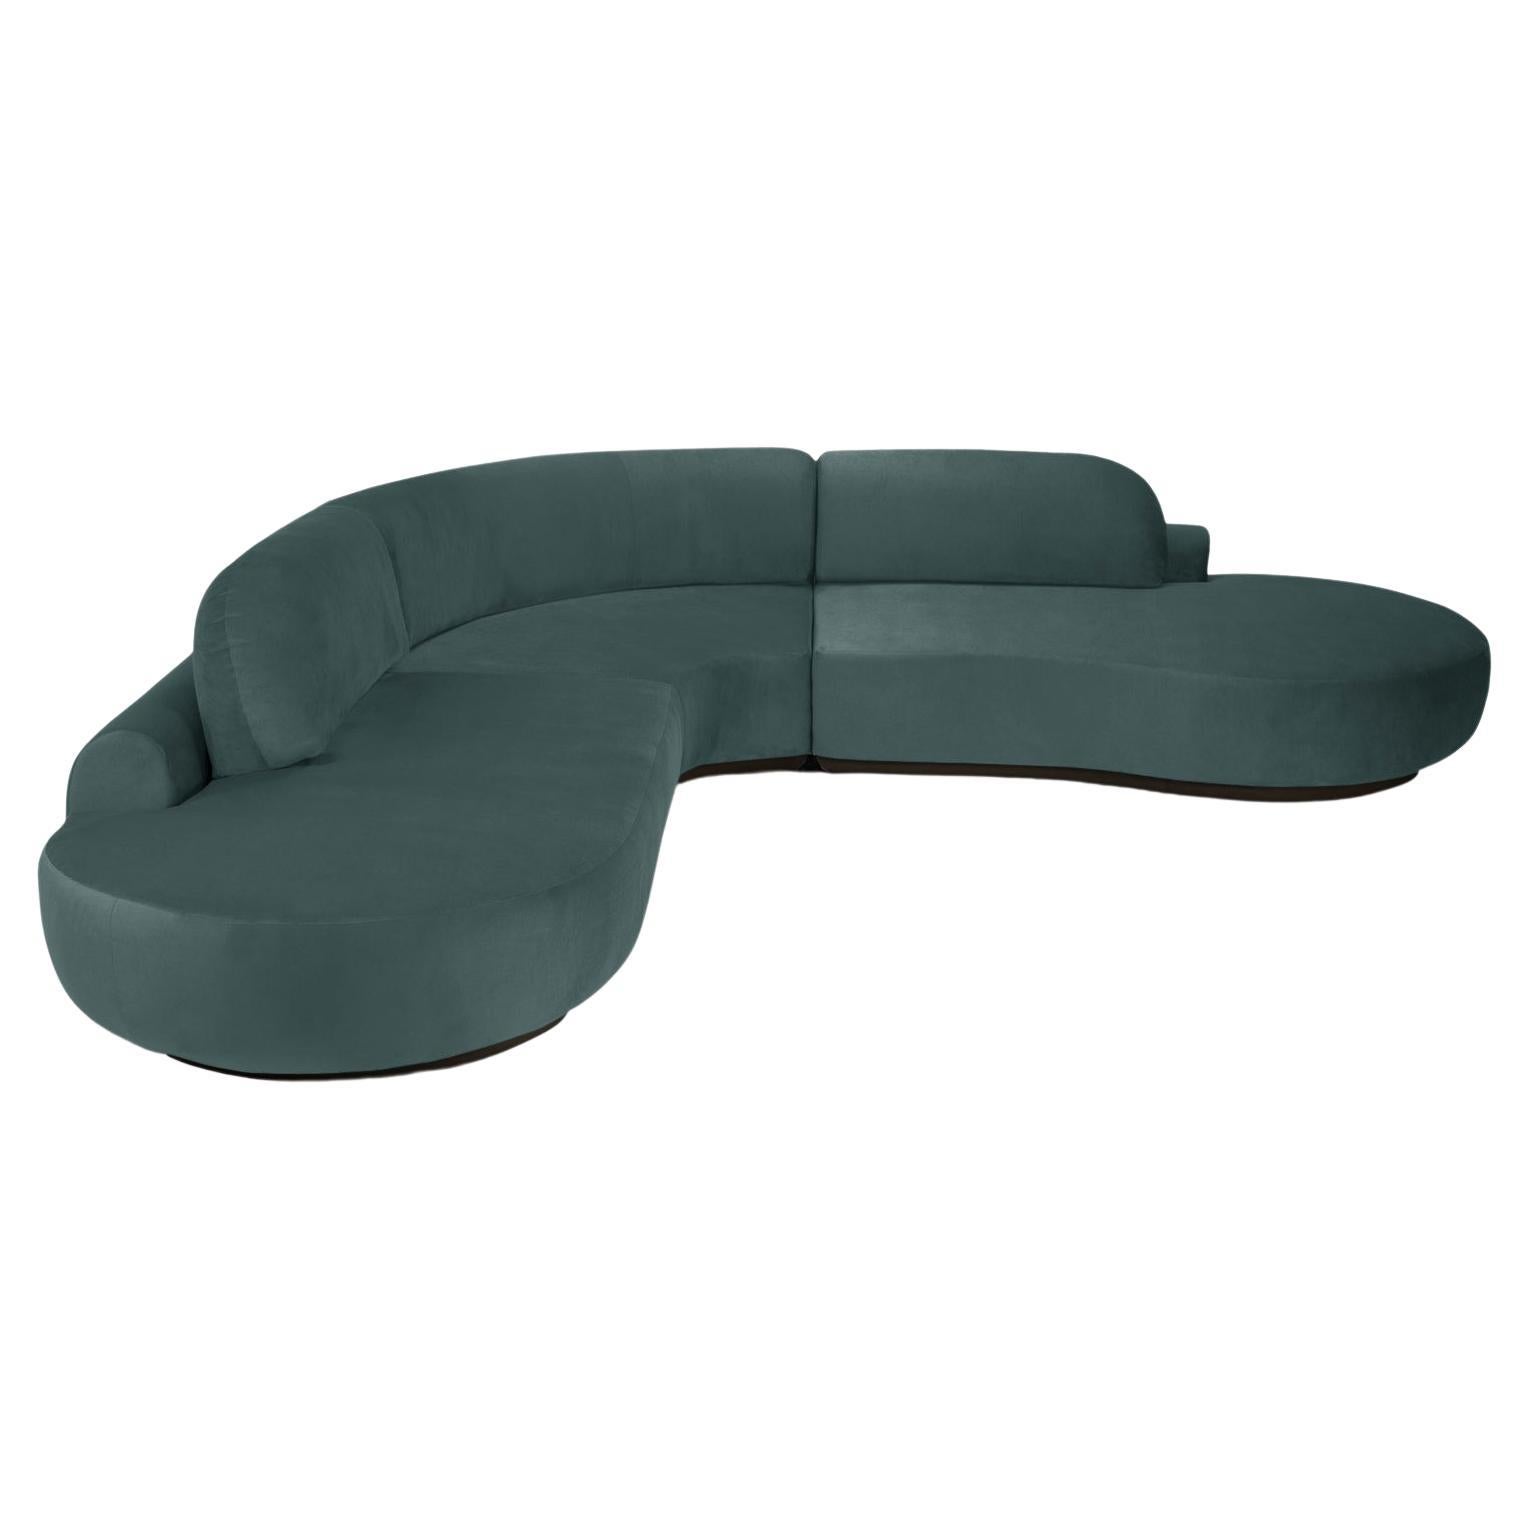 Naked Curved Sectional Sofa, 3 Piece with Beech Ash-056-5 and Teal